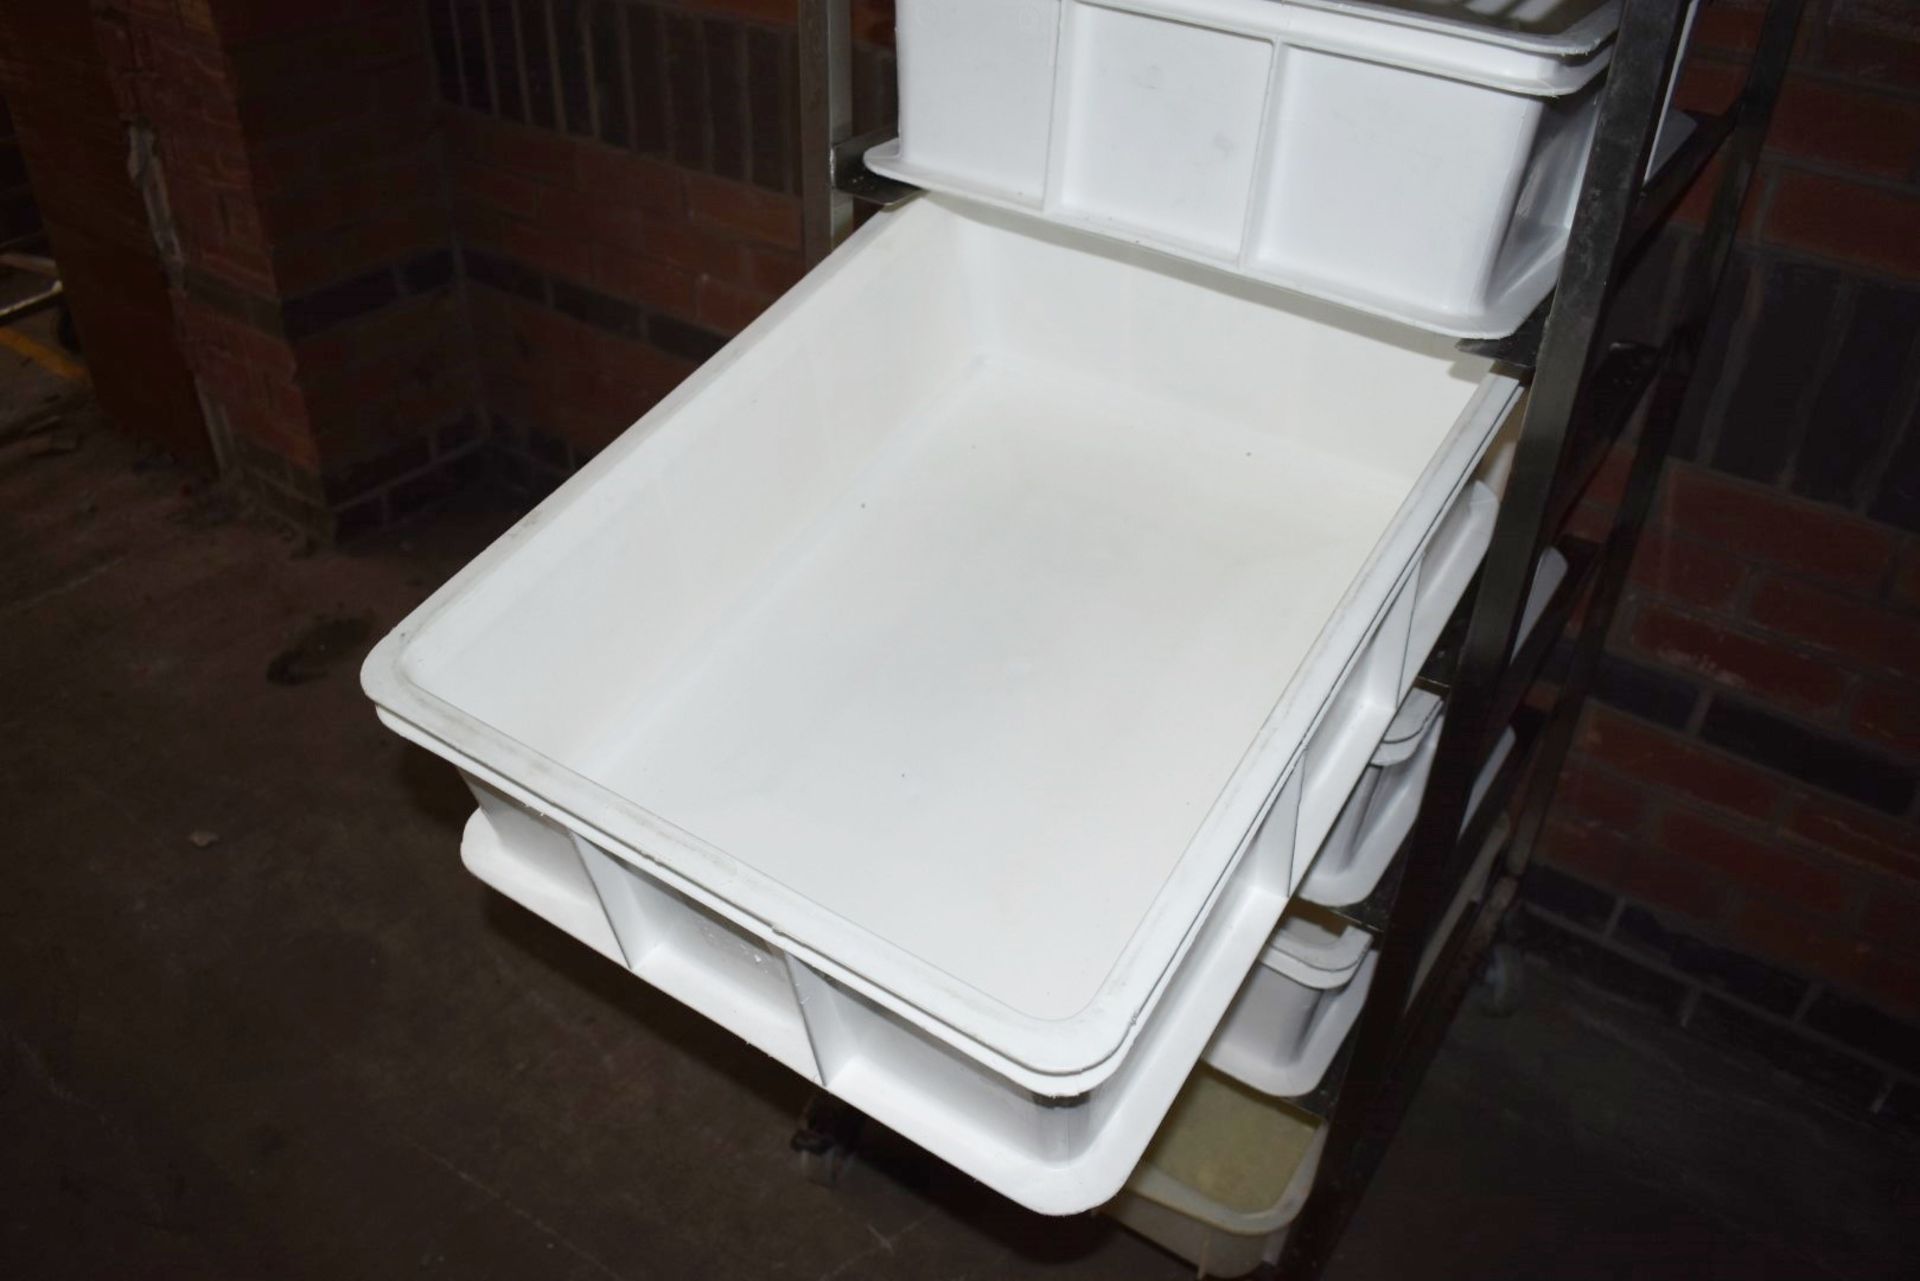 1 x Upright Mobile Baking Rack With Seven Large Plastic Dough Trays - Dimensions: H190 x W52 x D64 - Image 2 of 5